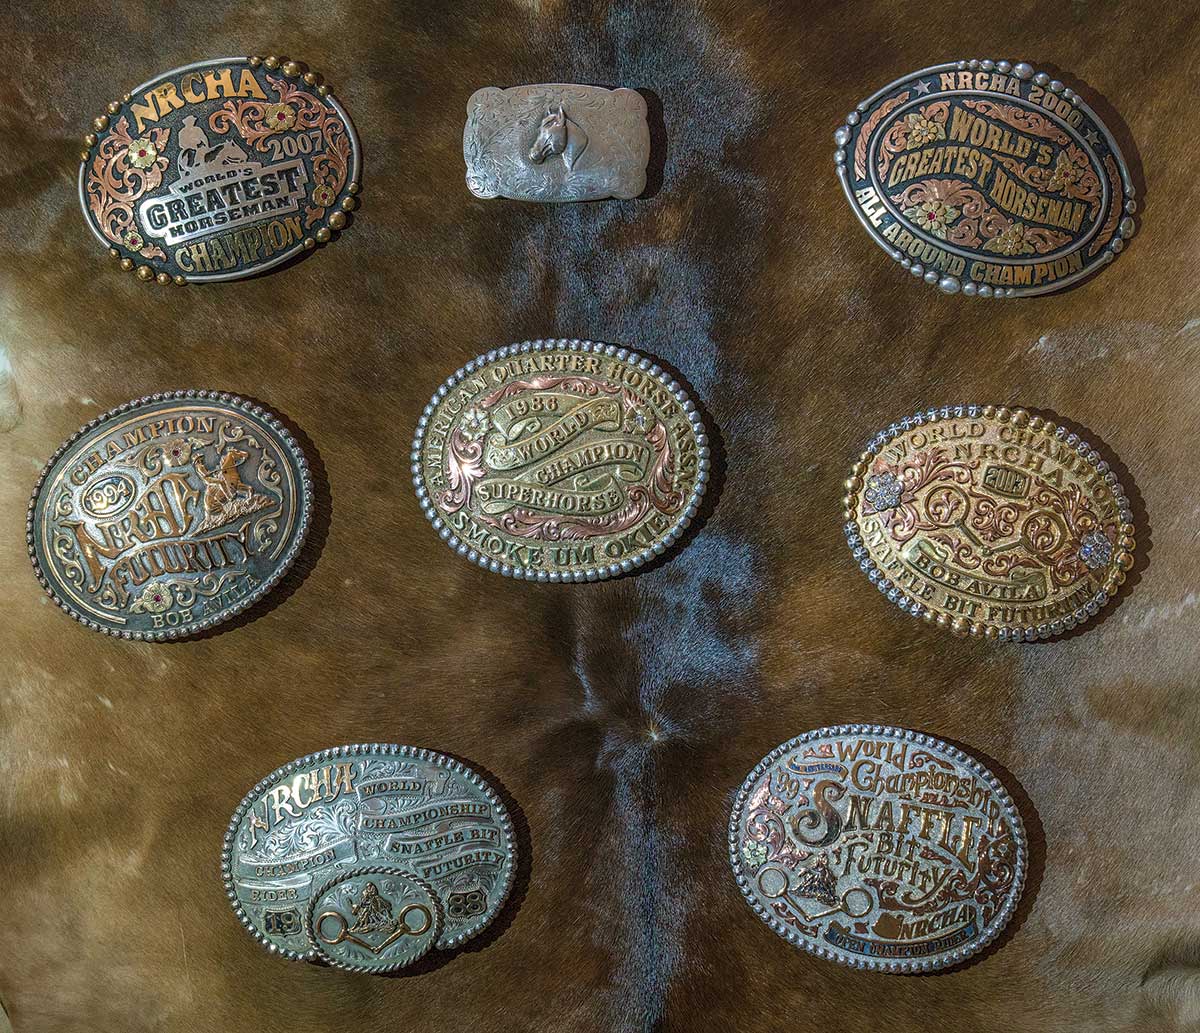 My Collection: Trophy Belt Buckle Collection